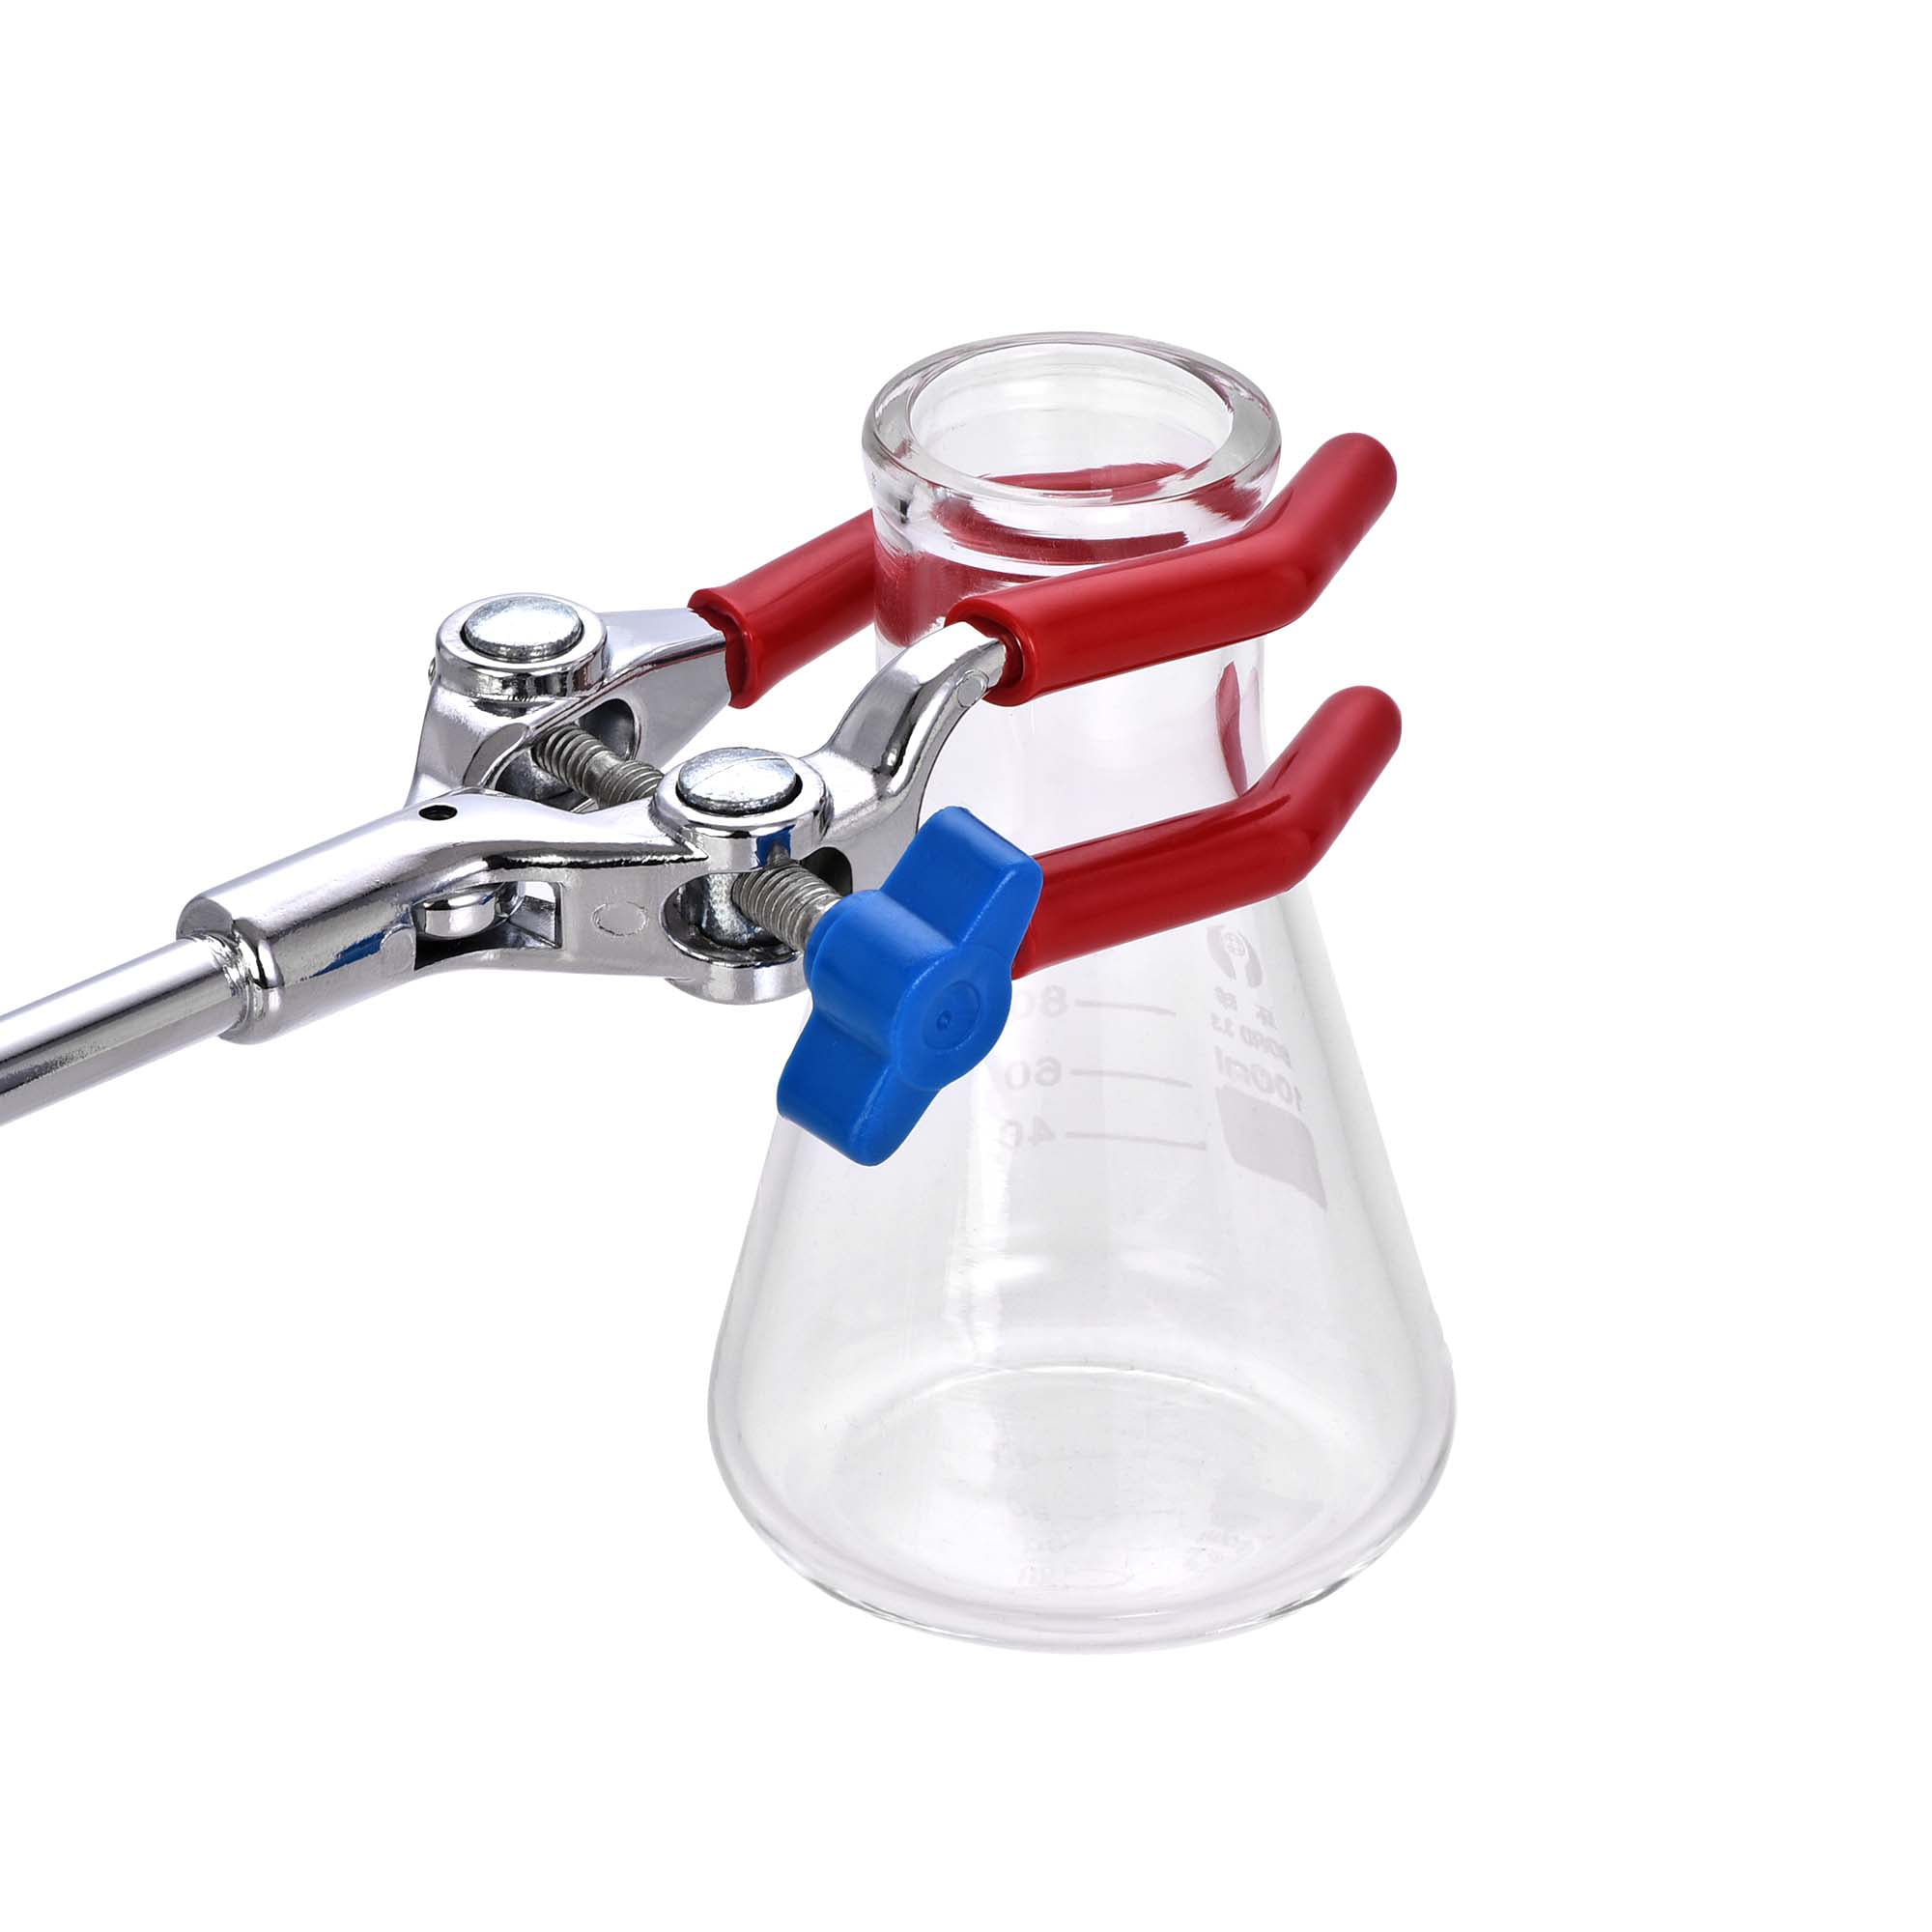 uxcell Labs Clamp 4 Prongs Flask Beaker Clamp Holder Plastic Coated Fingers 280mm Length Opens Up to 86mm Diameter Silver Tone for Usual Clamp 2Pcs 